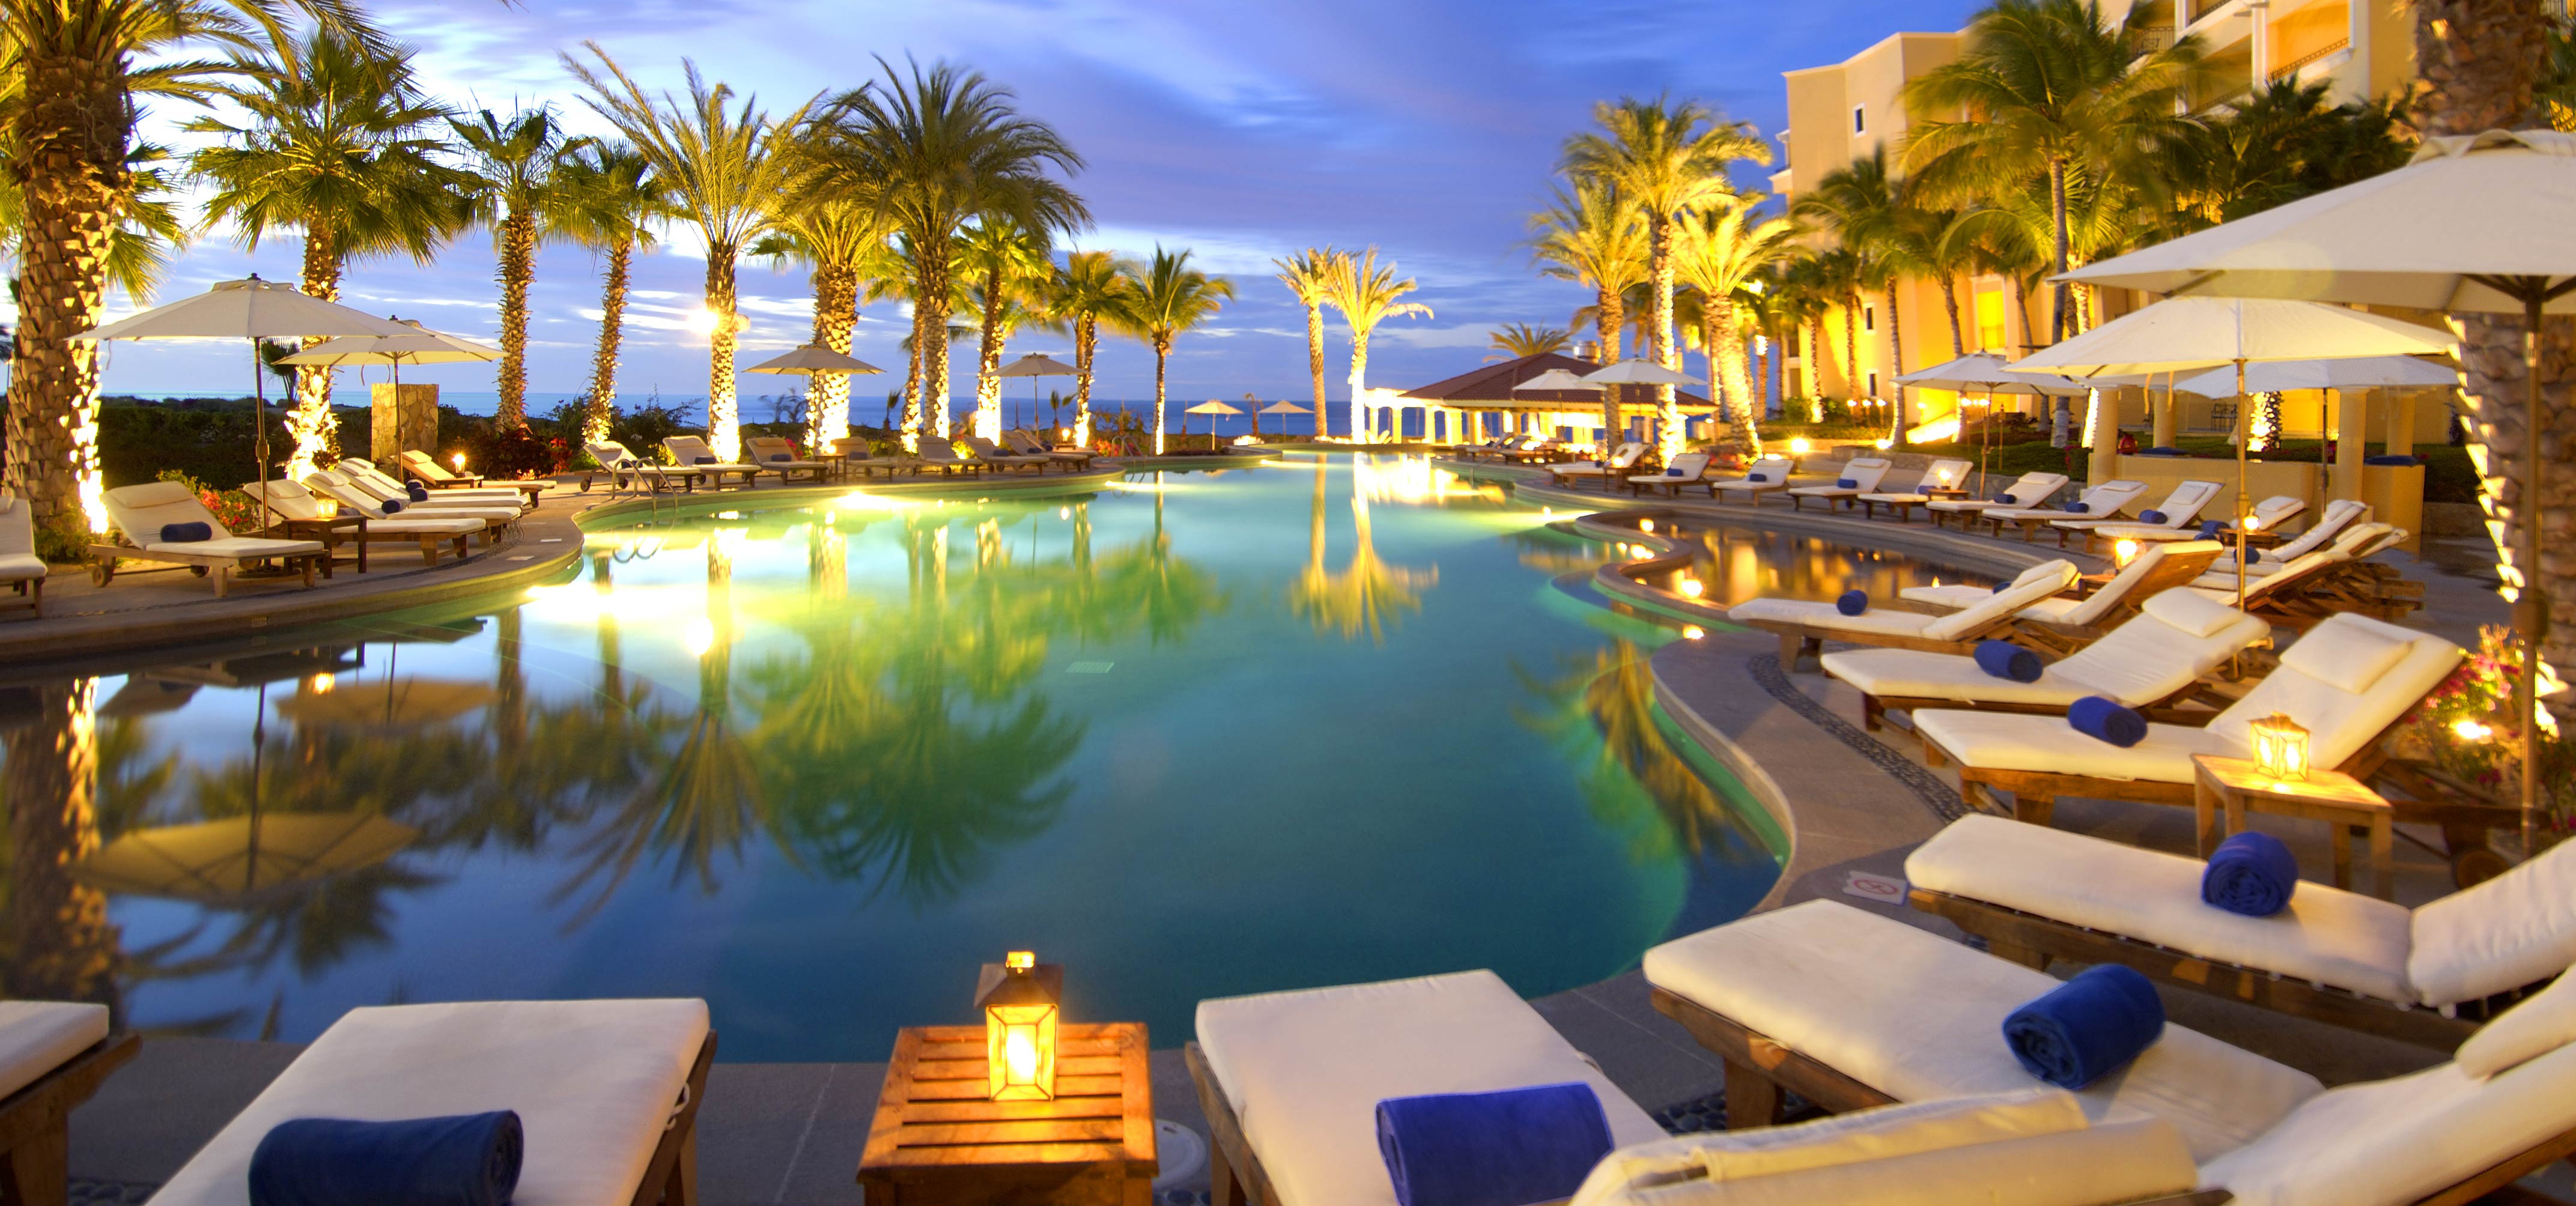 HQ Los Cabos Hotel Wallpapers | File 4409.83Kb